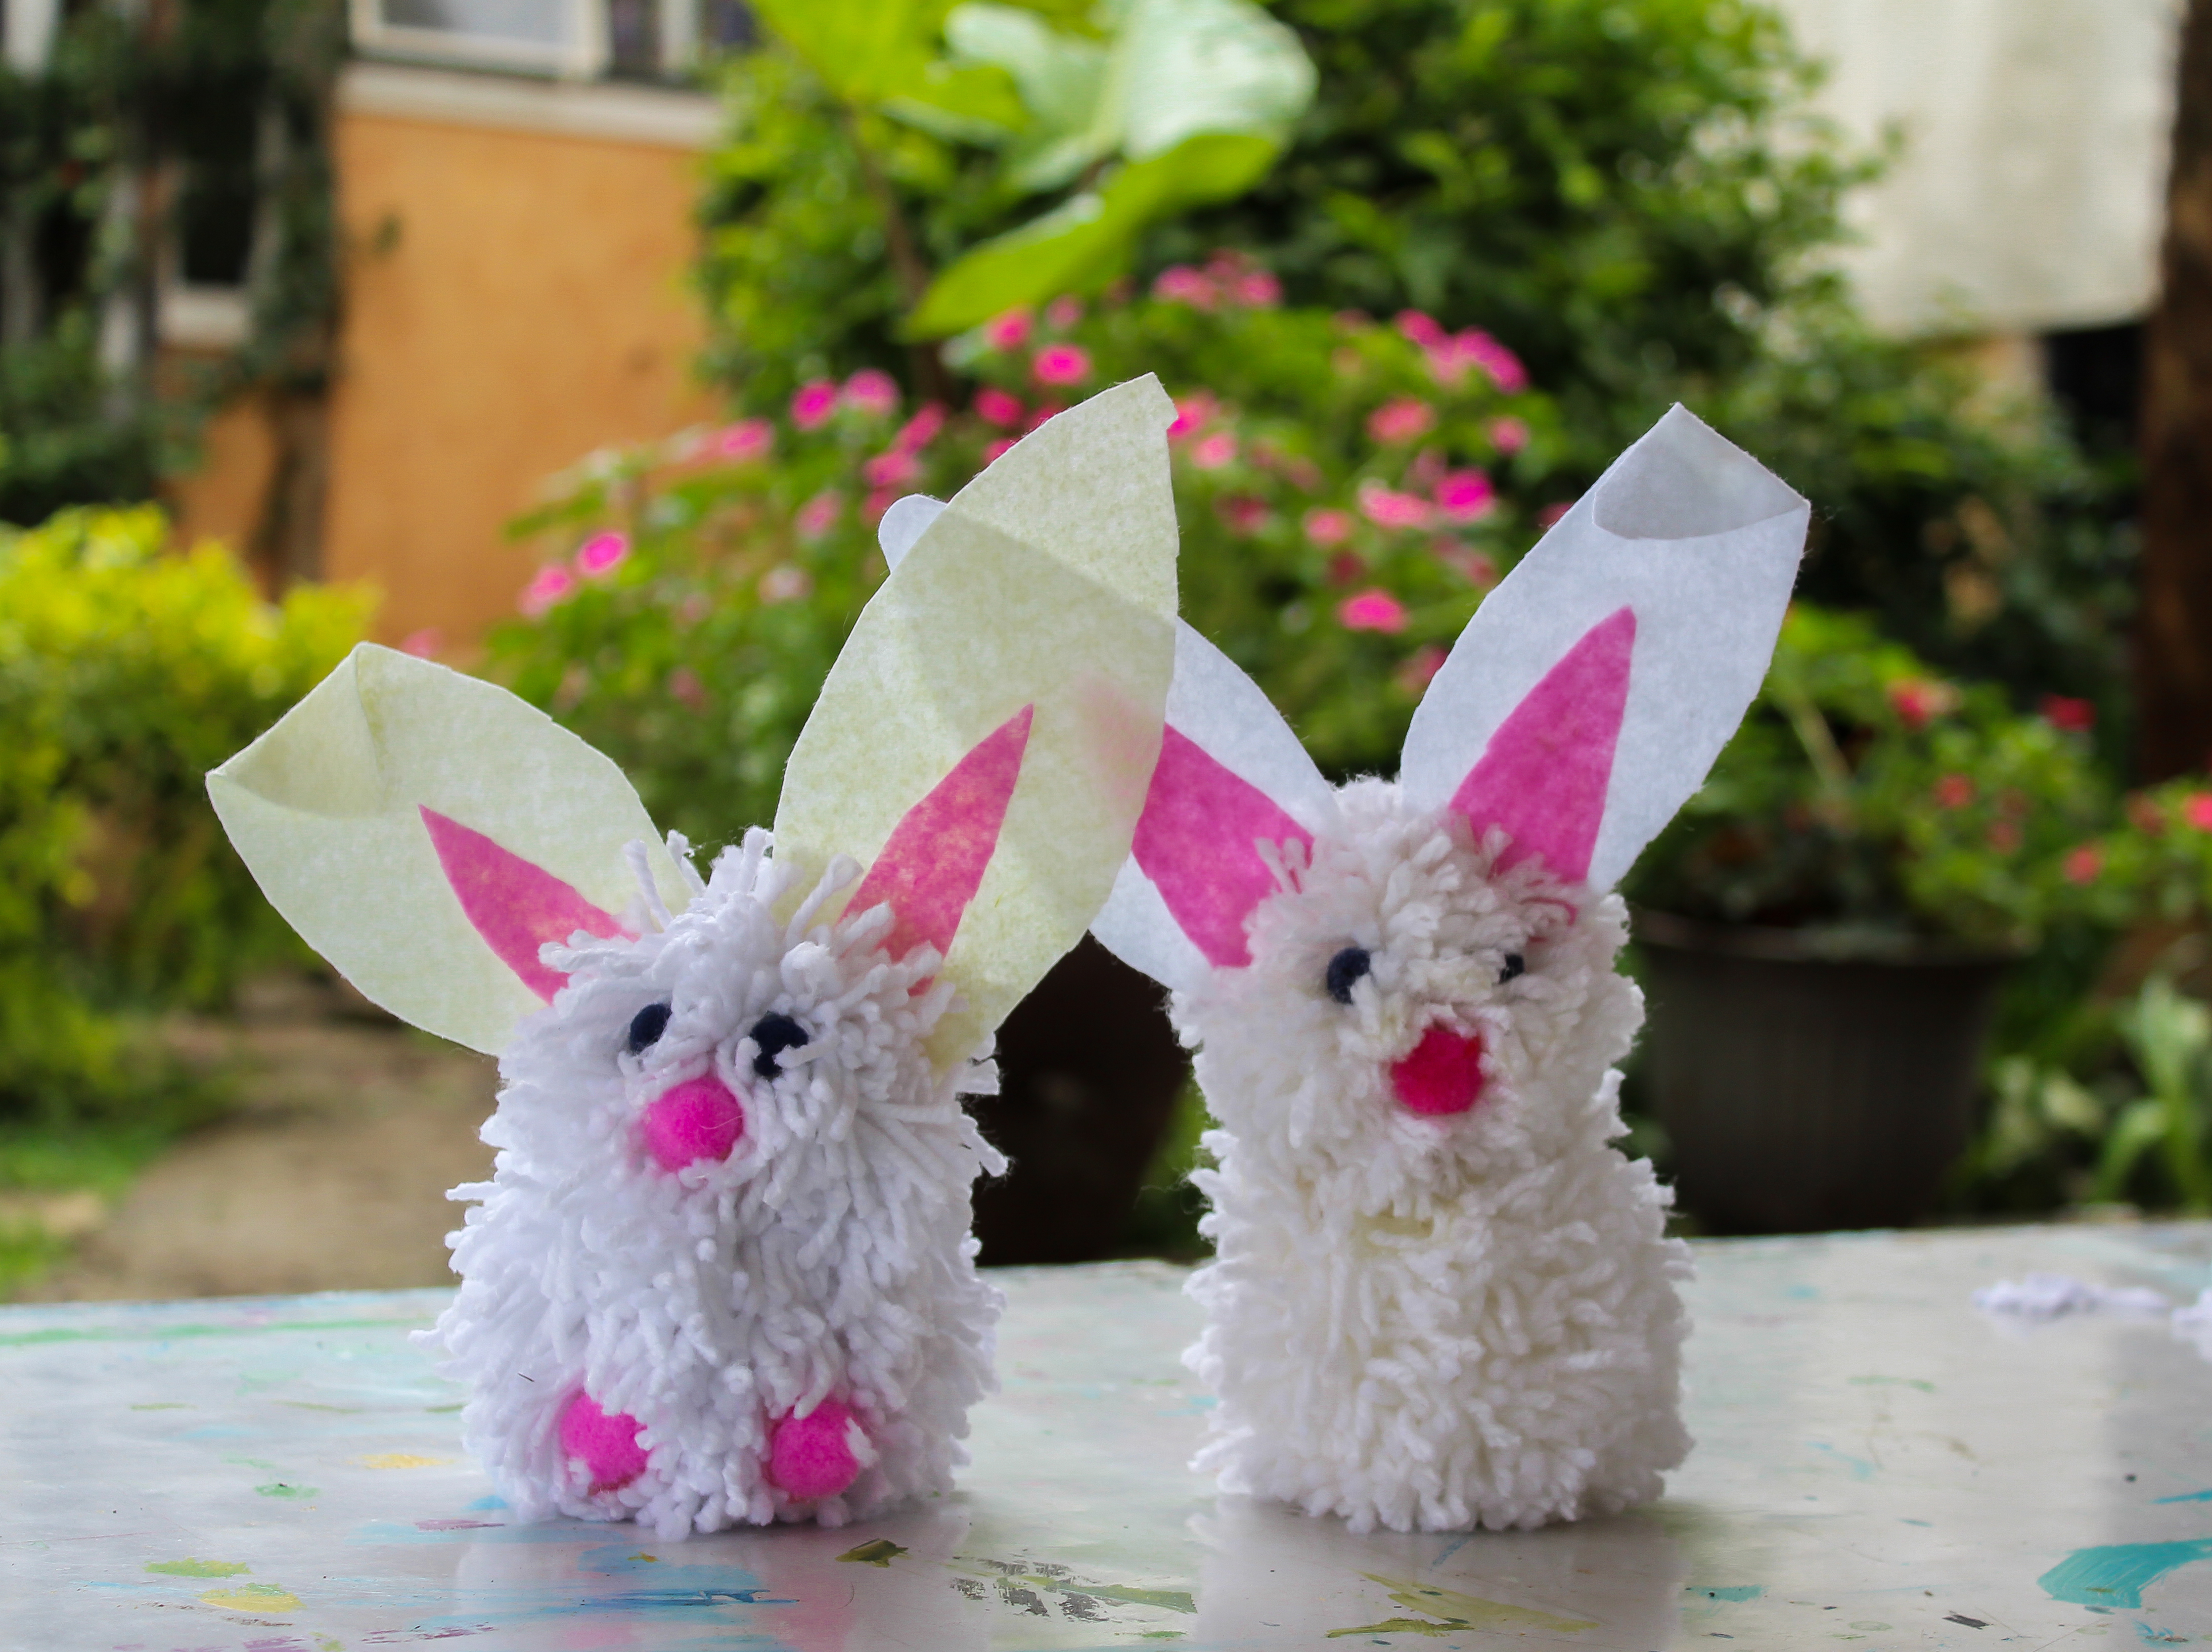 Kids Craft: Adorable DIY Easter Bunny by Miss Racheal from the Nairobi Art Centre